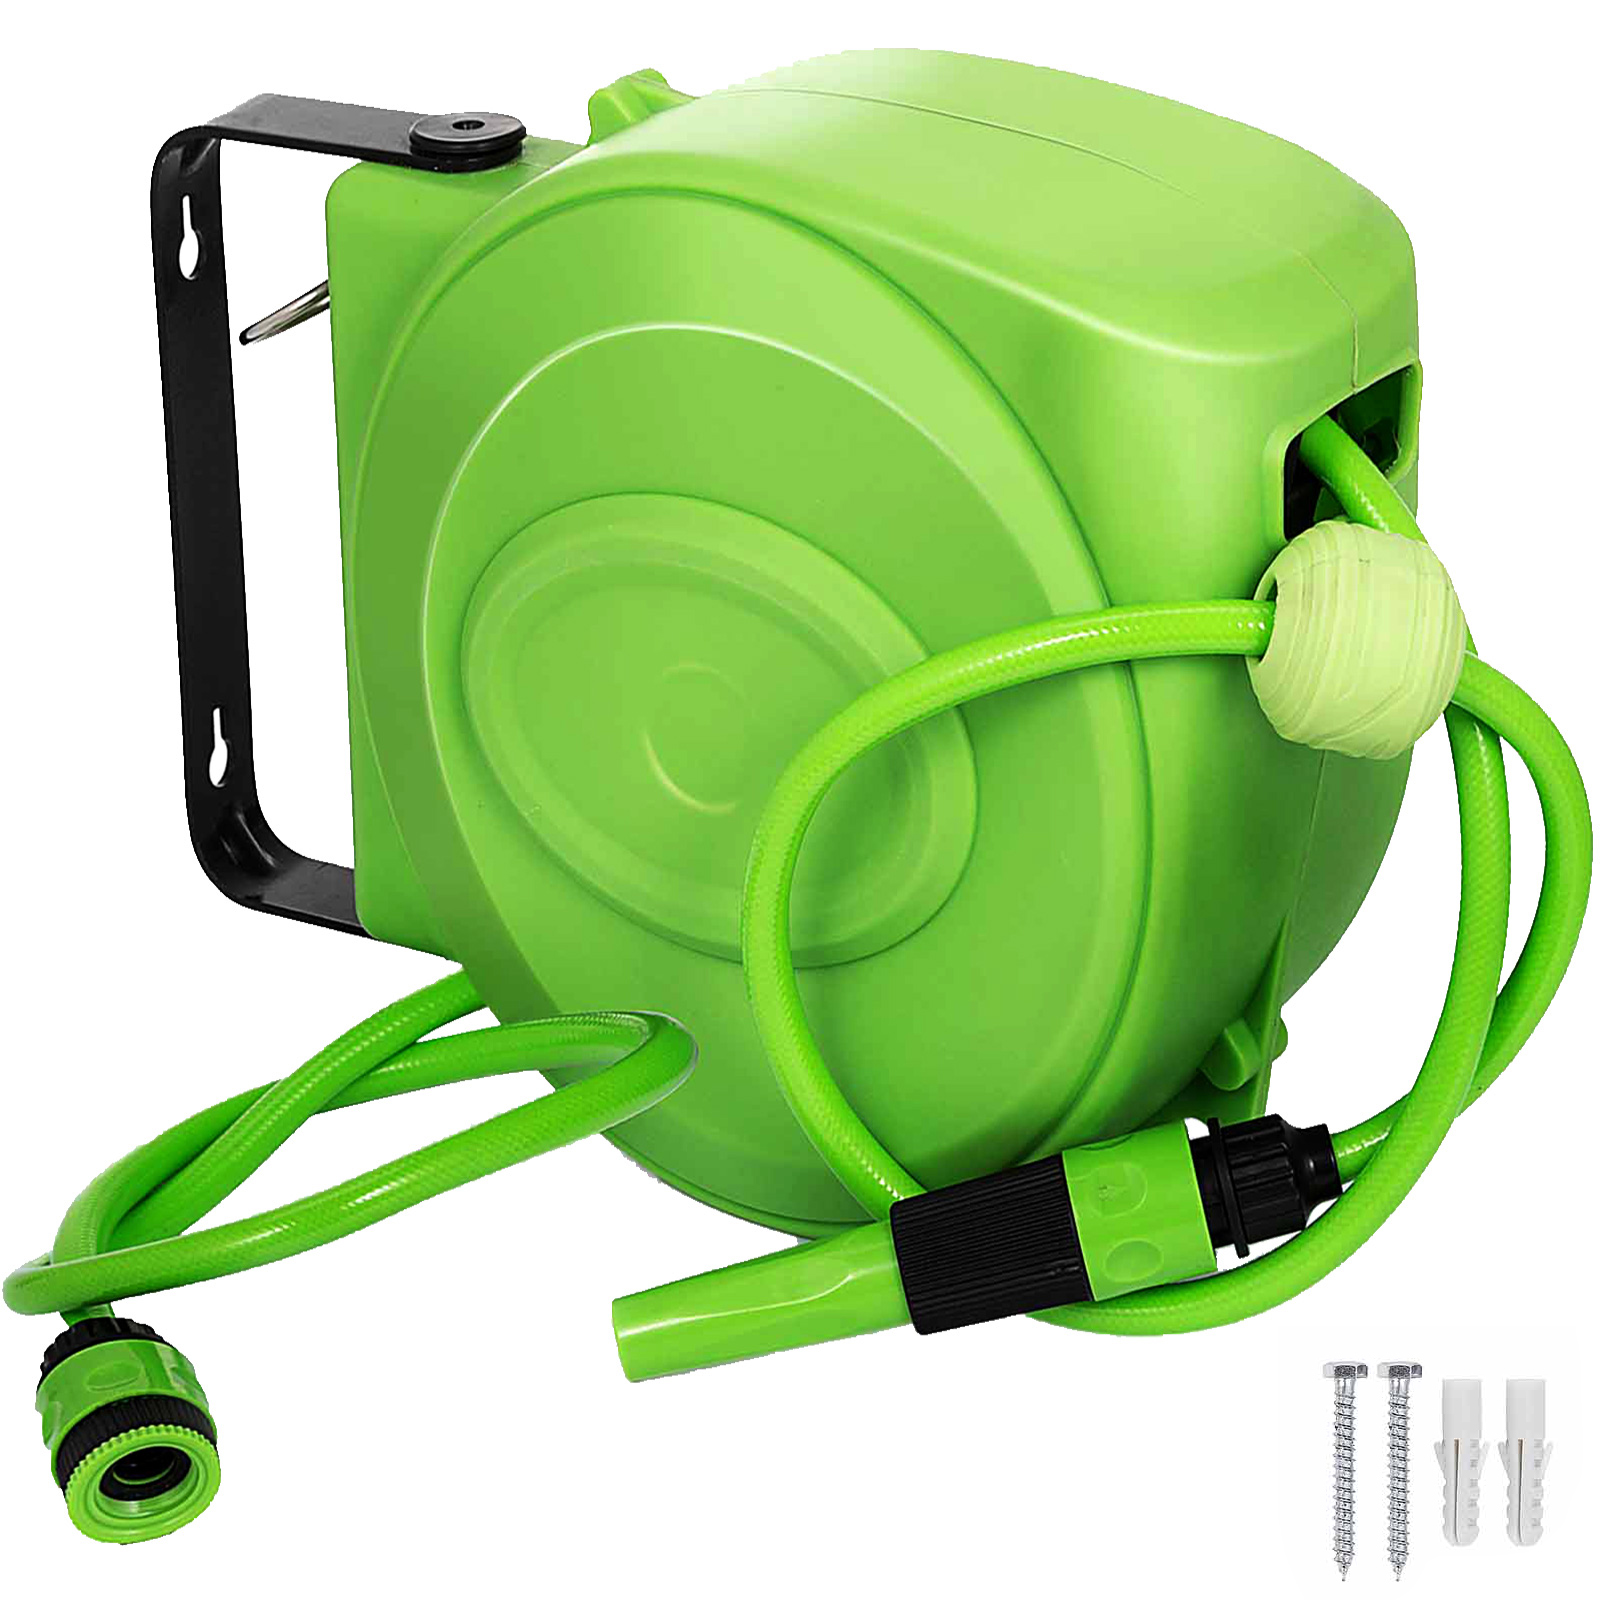 VEVOR 10M Retractable Water Hose Reel Wall Mounted Auto Rewind